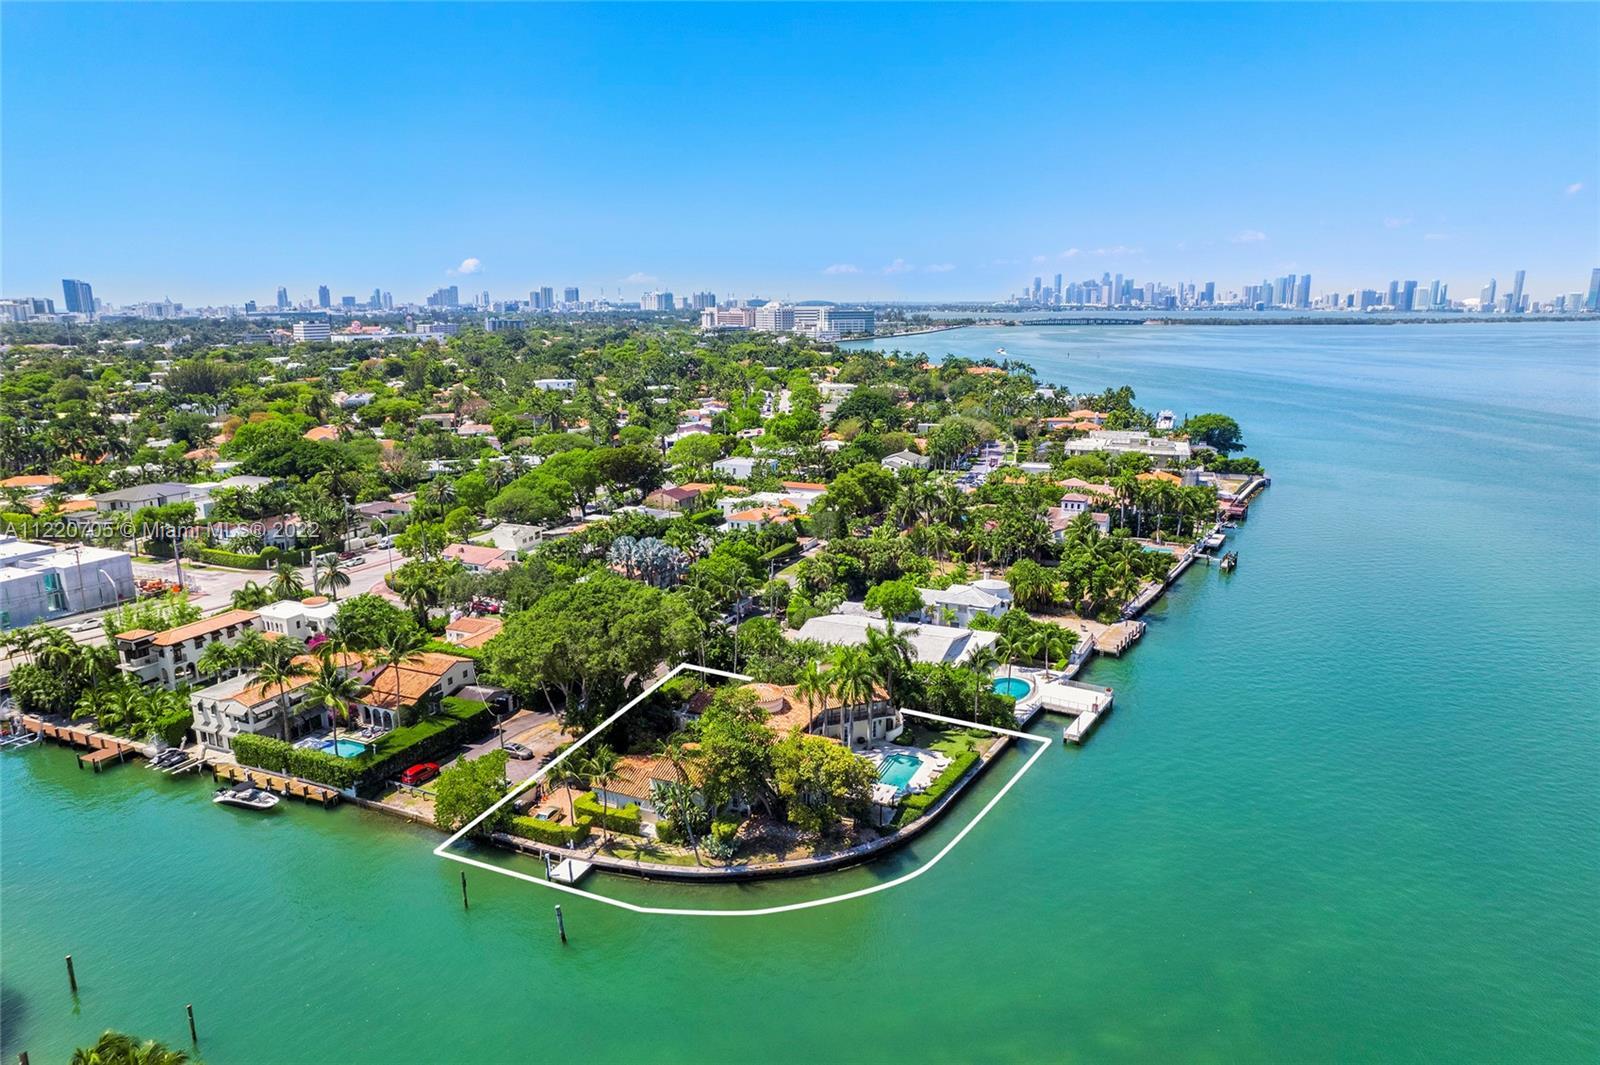 Located on prestigious North Bay Road this 2-story Mediterranean waterfront home sits on a private 2